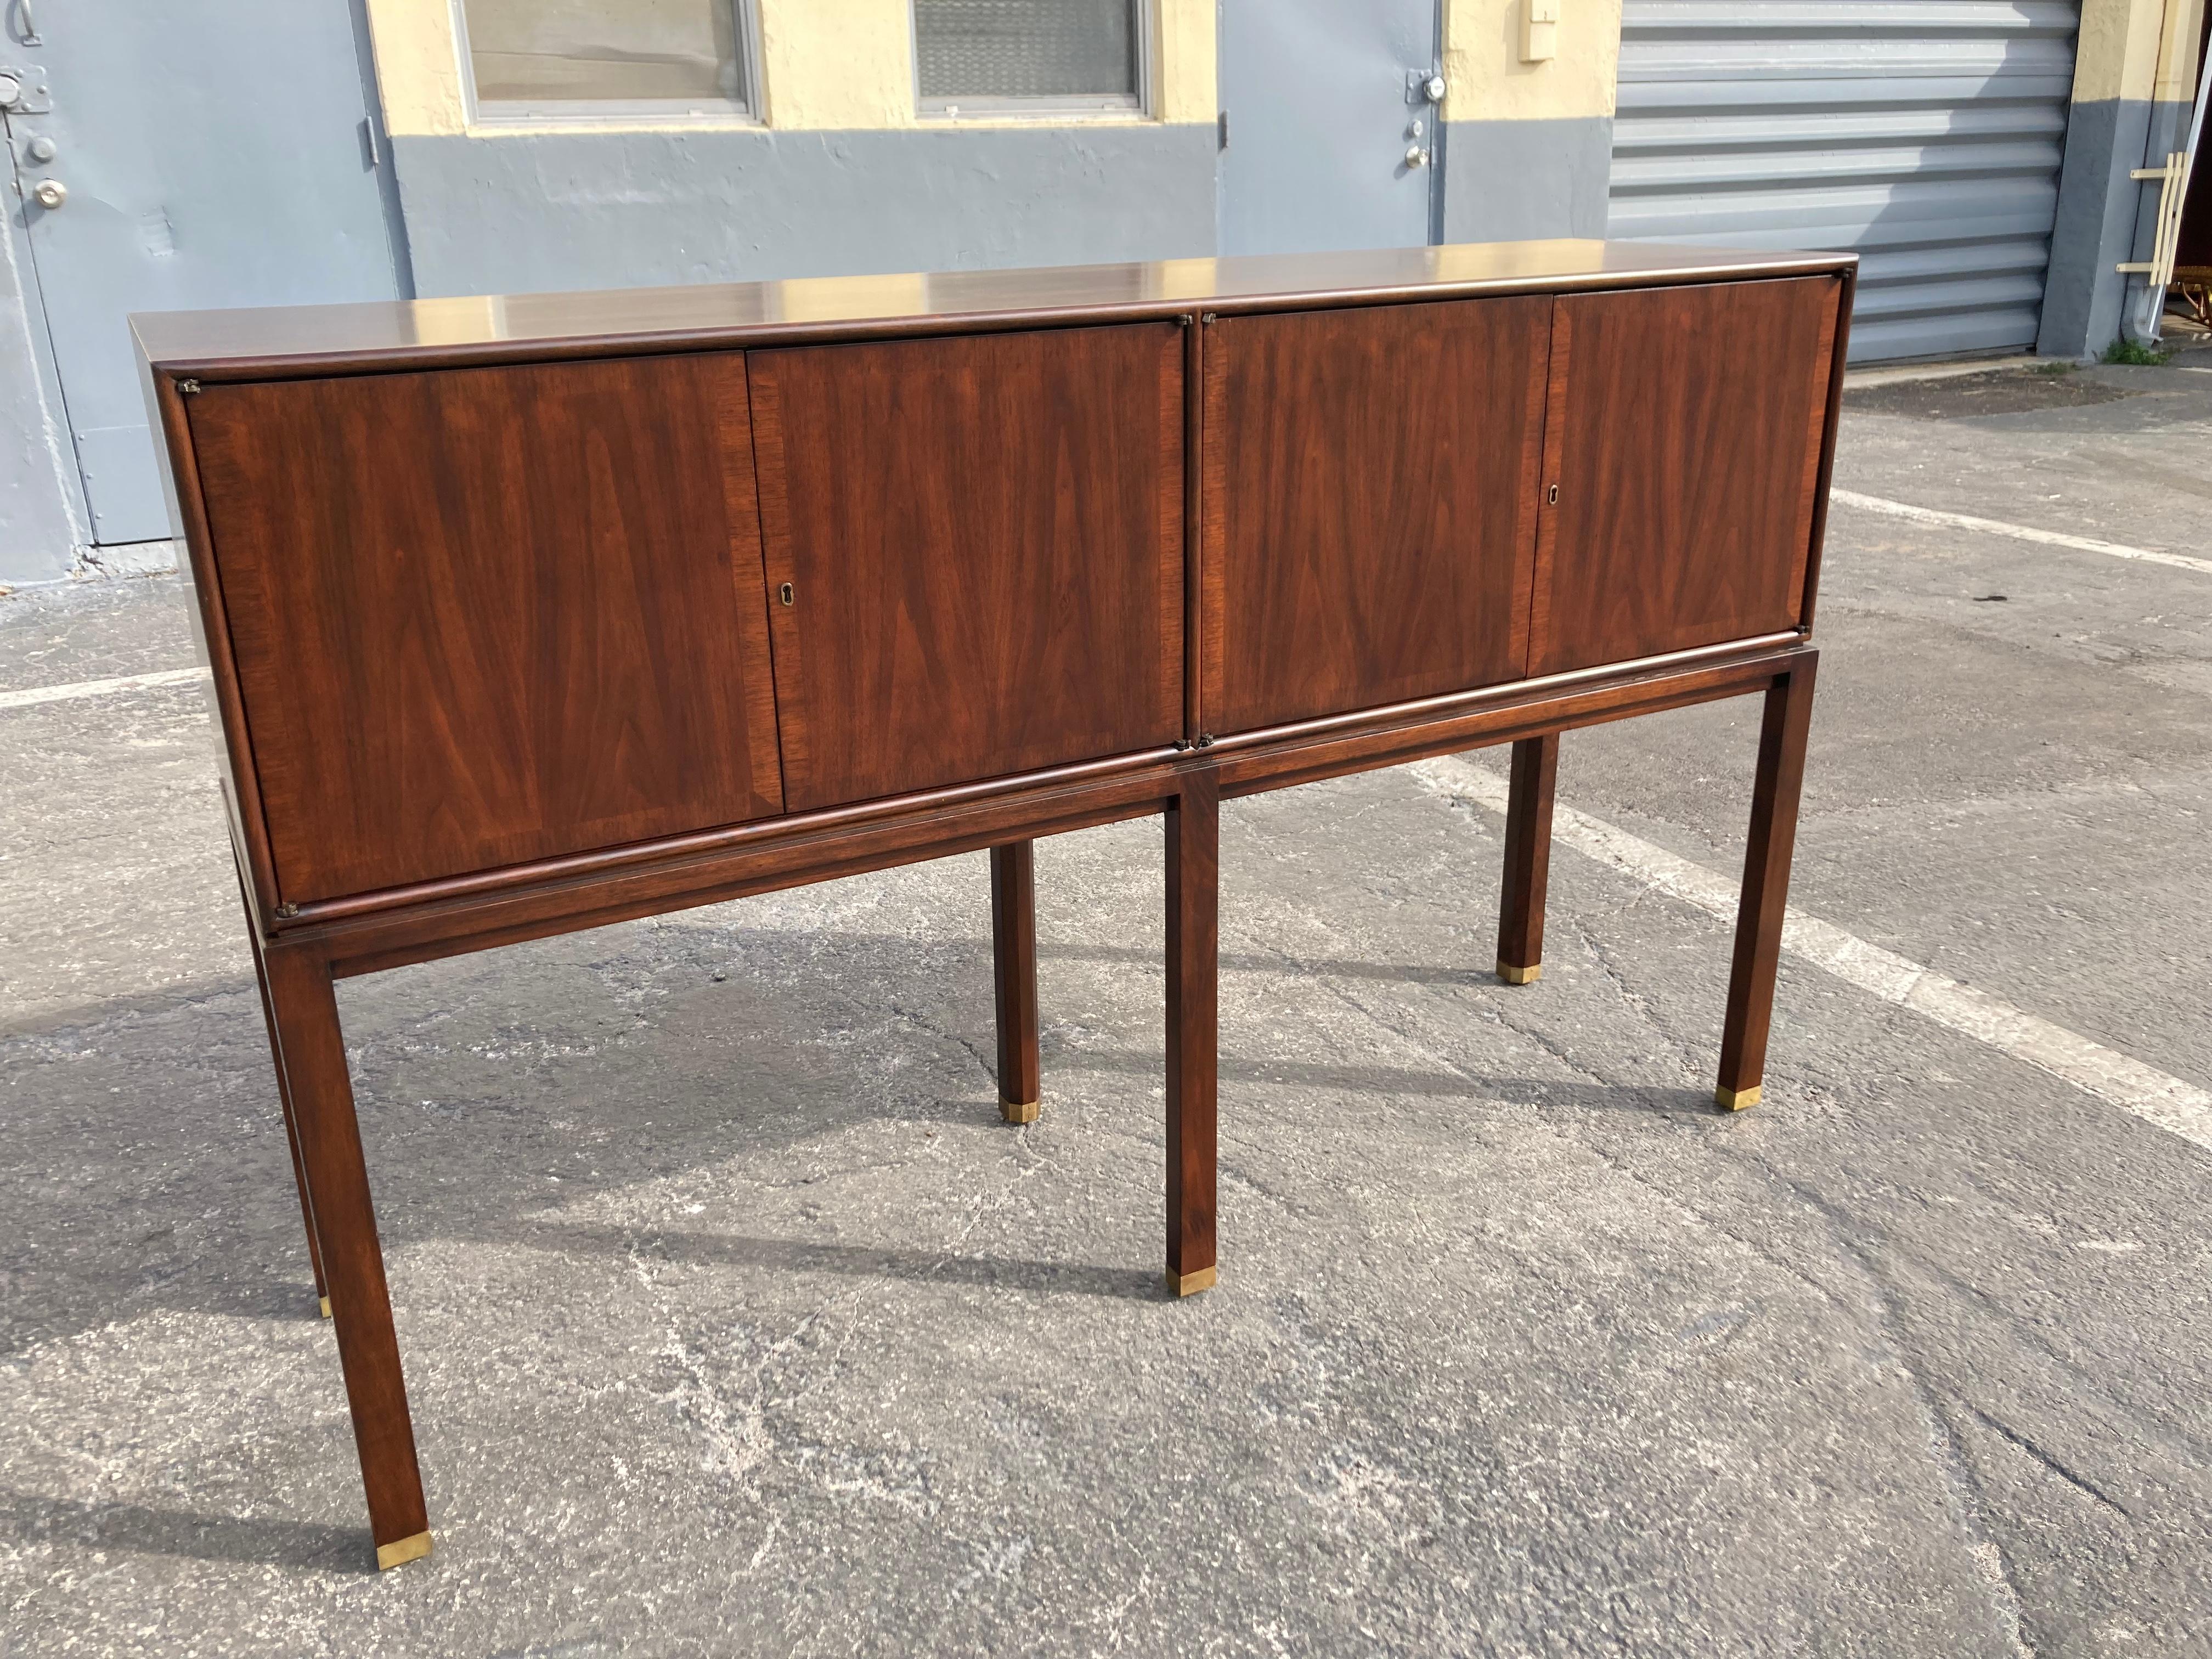 Beautiful Henredon buffet cabinet, mahogany and brass hardware, four doors with one key, two pull-out drawers. High quality piece. Please see all pictures 